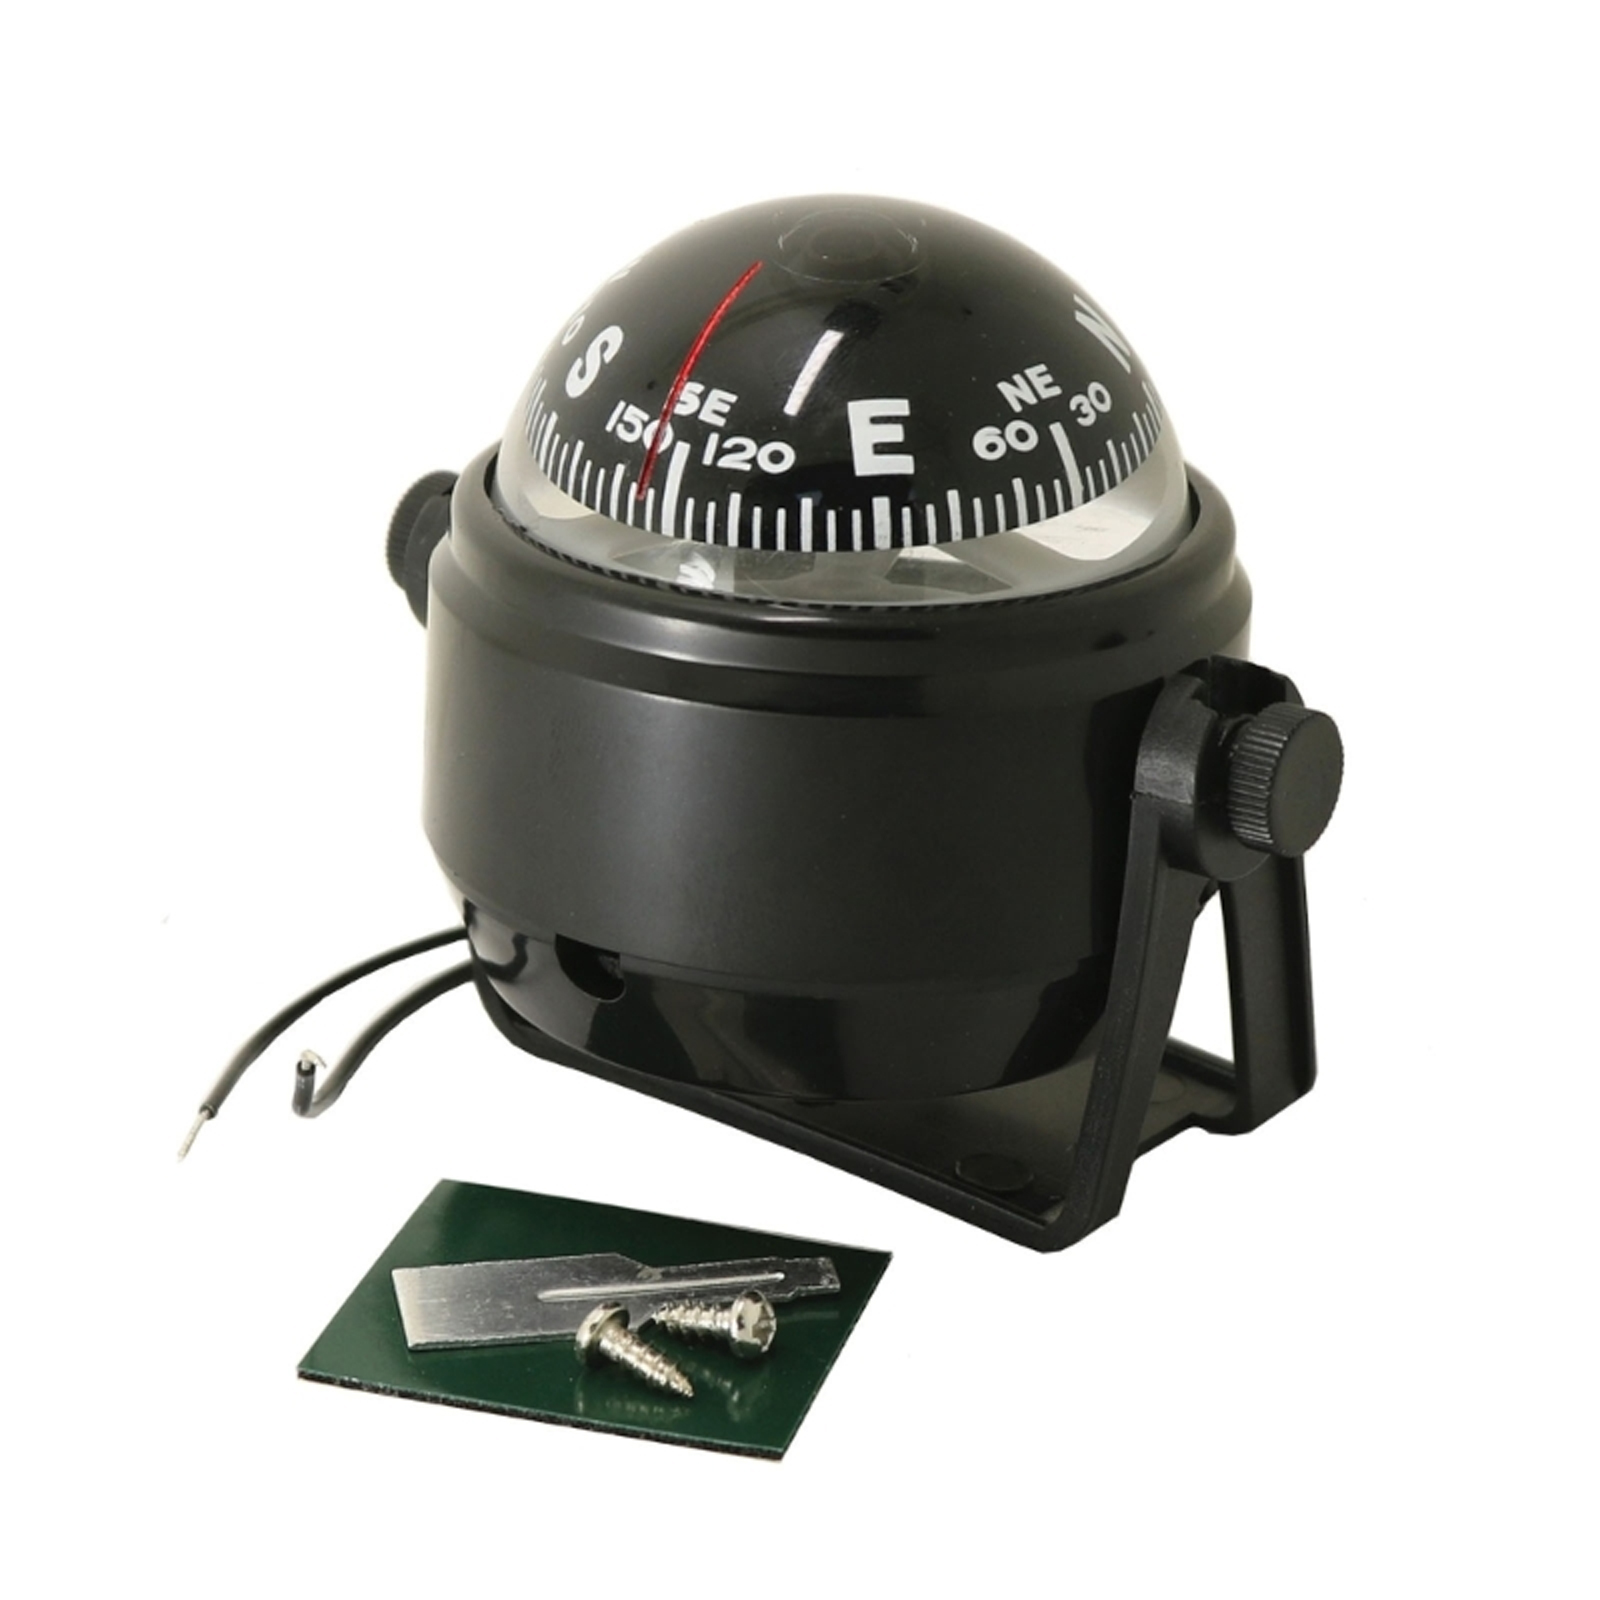 Outdoor Sea Marine Compass With Magnetic Declination Adjustment Multi-functional Car Compass With Light Lc550 black